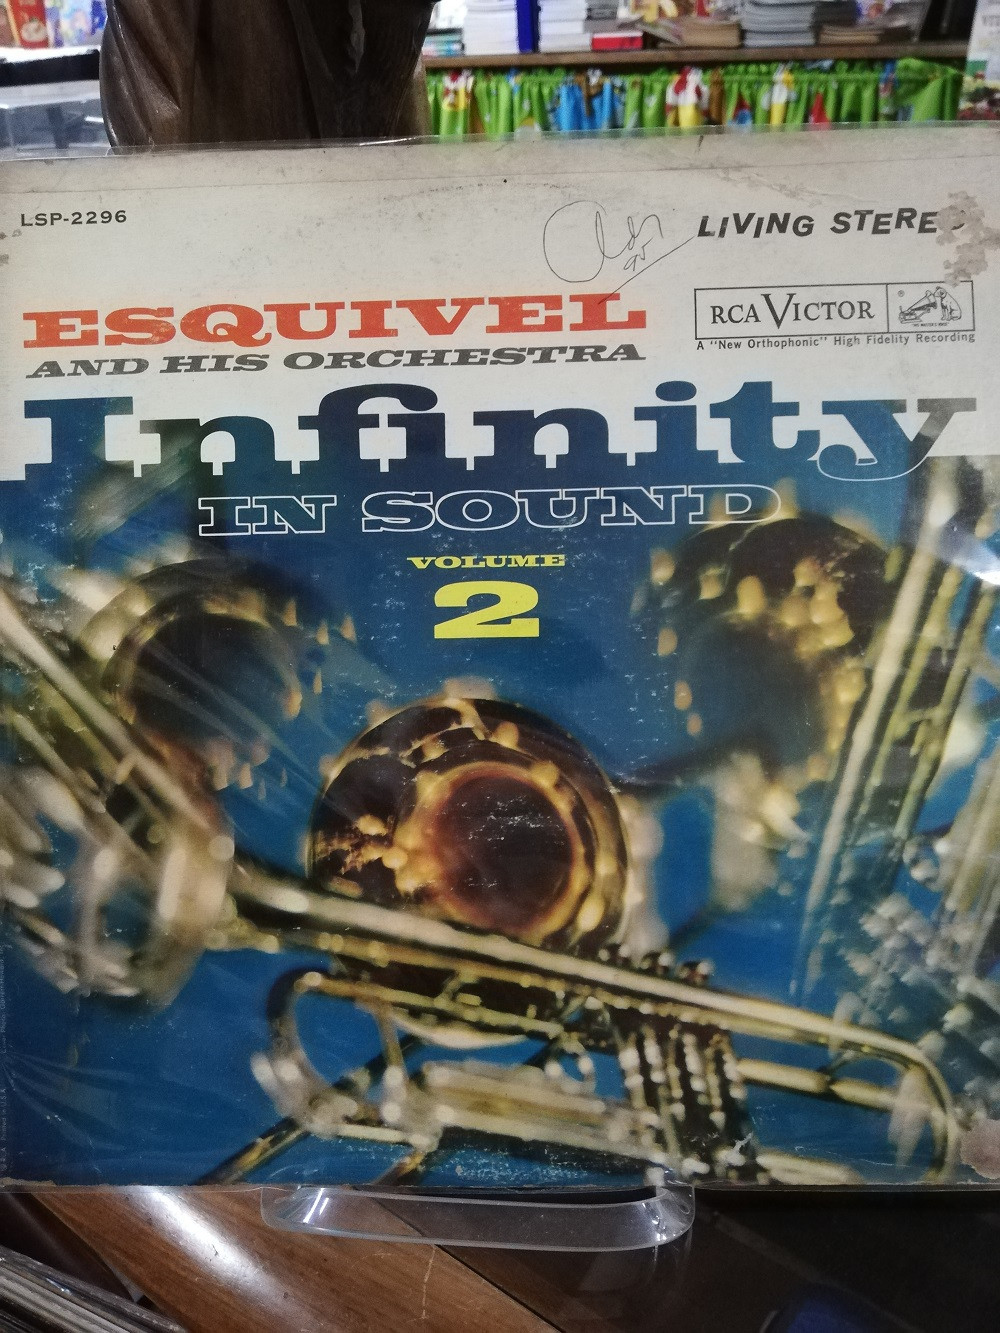 Imagen LP ESQUIVEL AND HIS ORCHESTRA - INFINITY IN SOUND VOL. 2 1